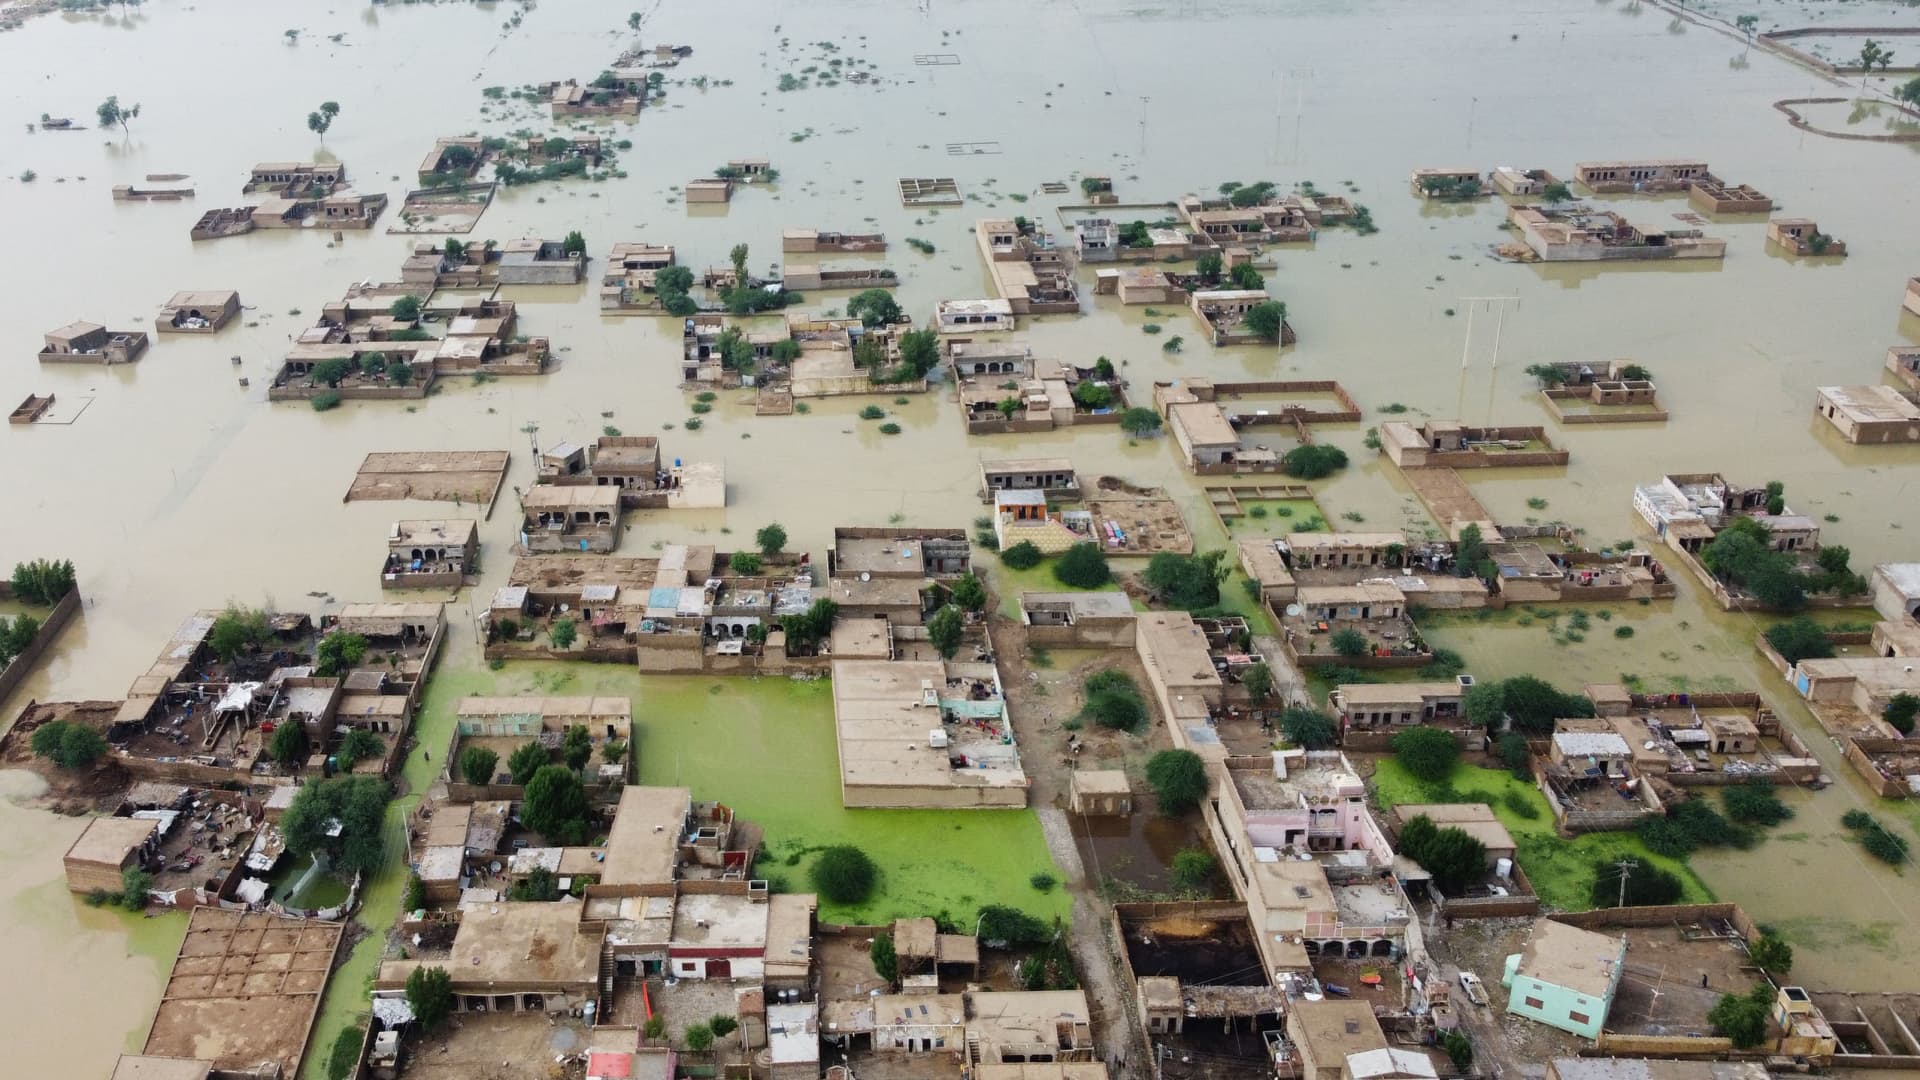 This aerial view shows a flooded residential area in Dera Allah Yar town after heavy monsoon rains in Jaffarabad district, Balochistan province on August 30, 2022.